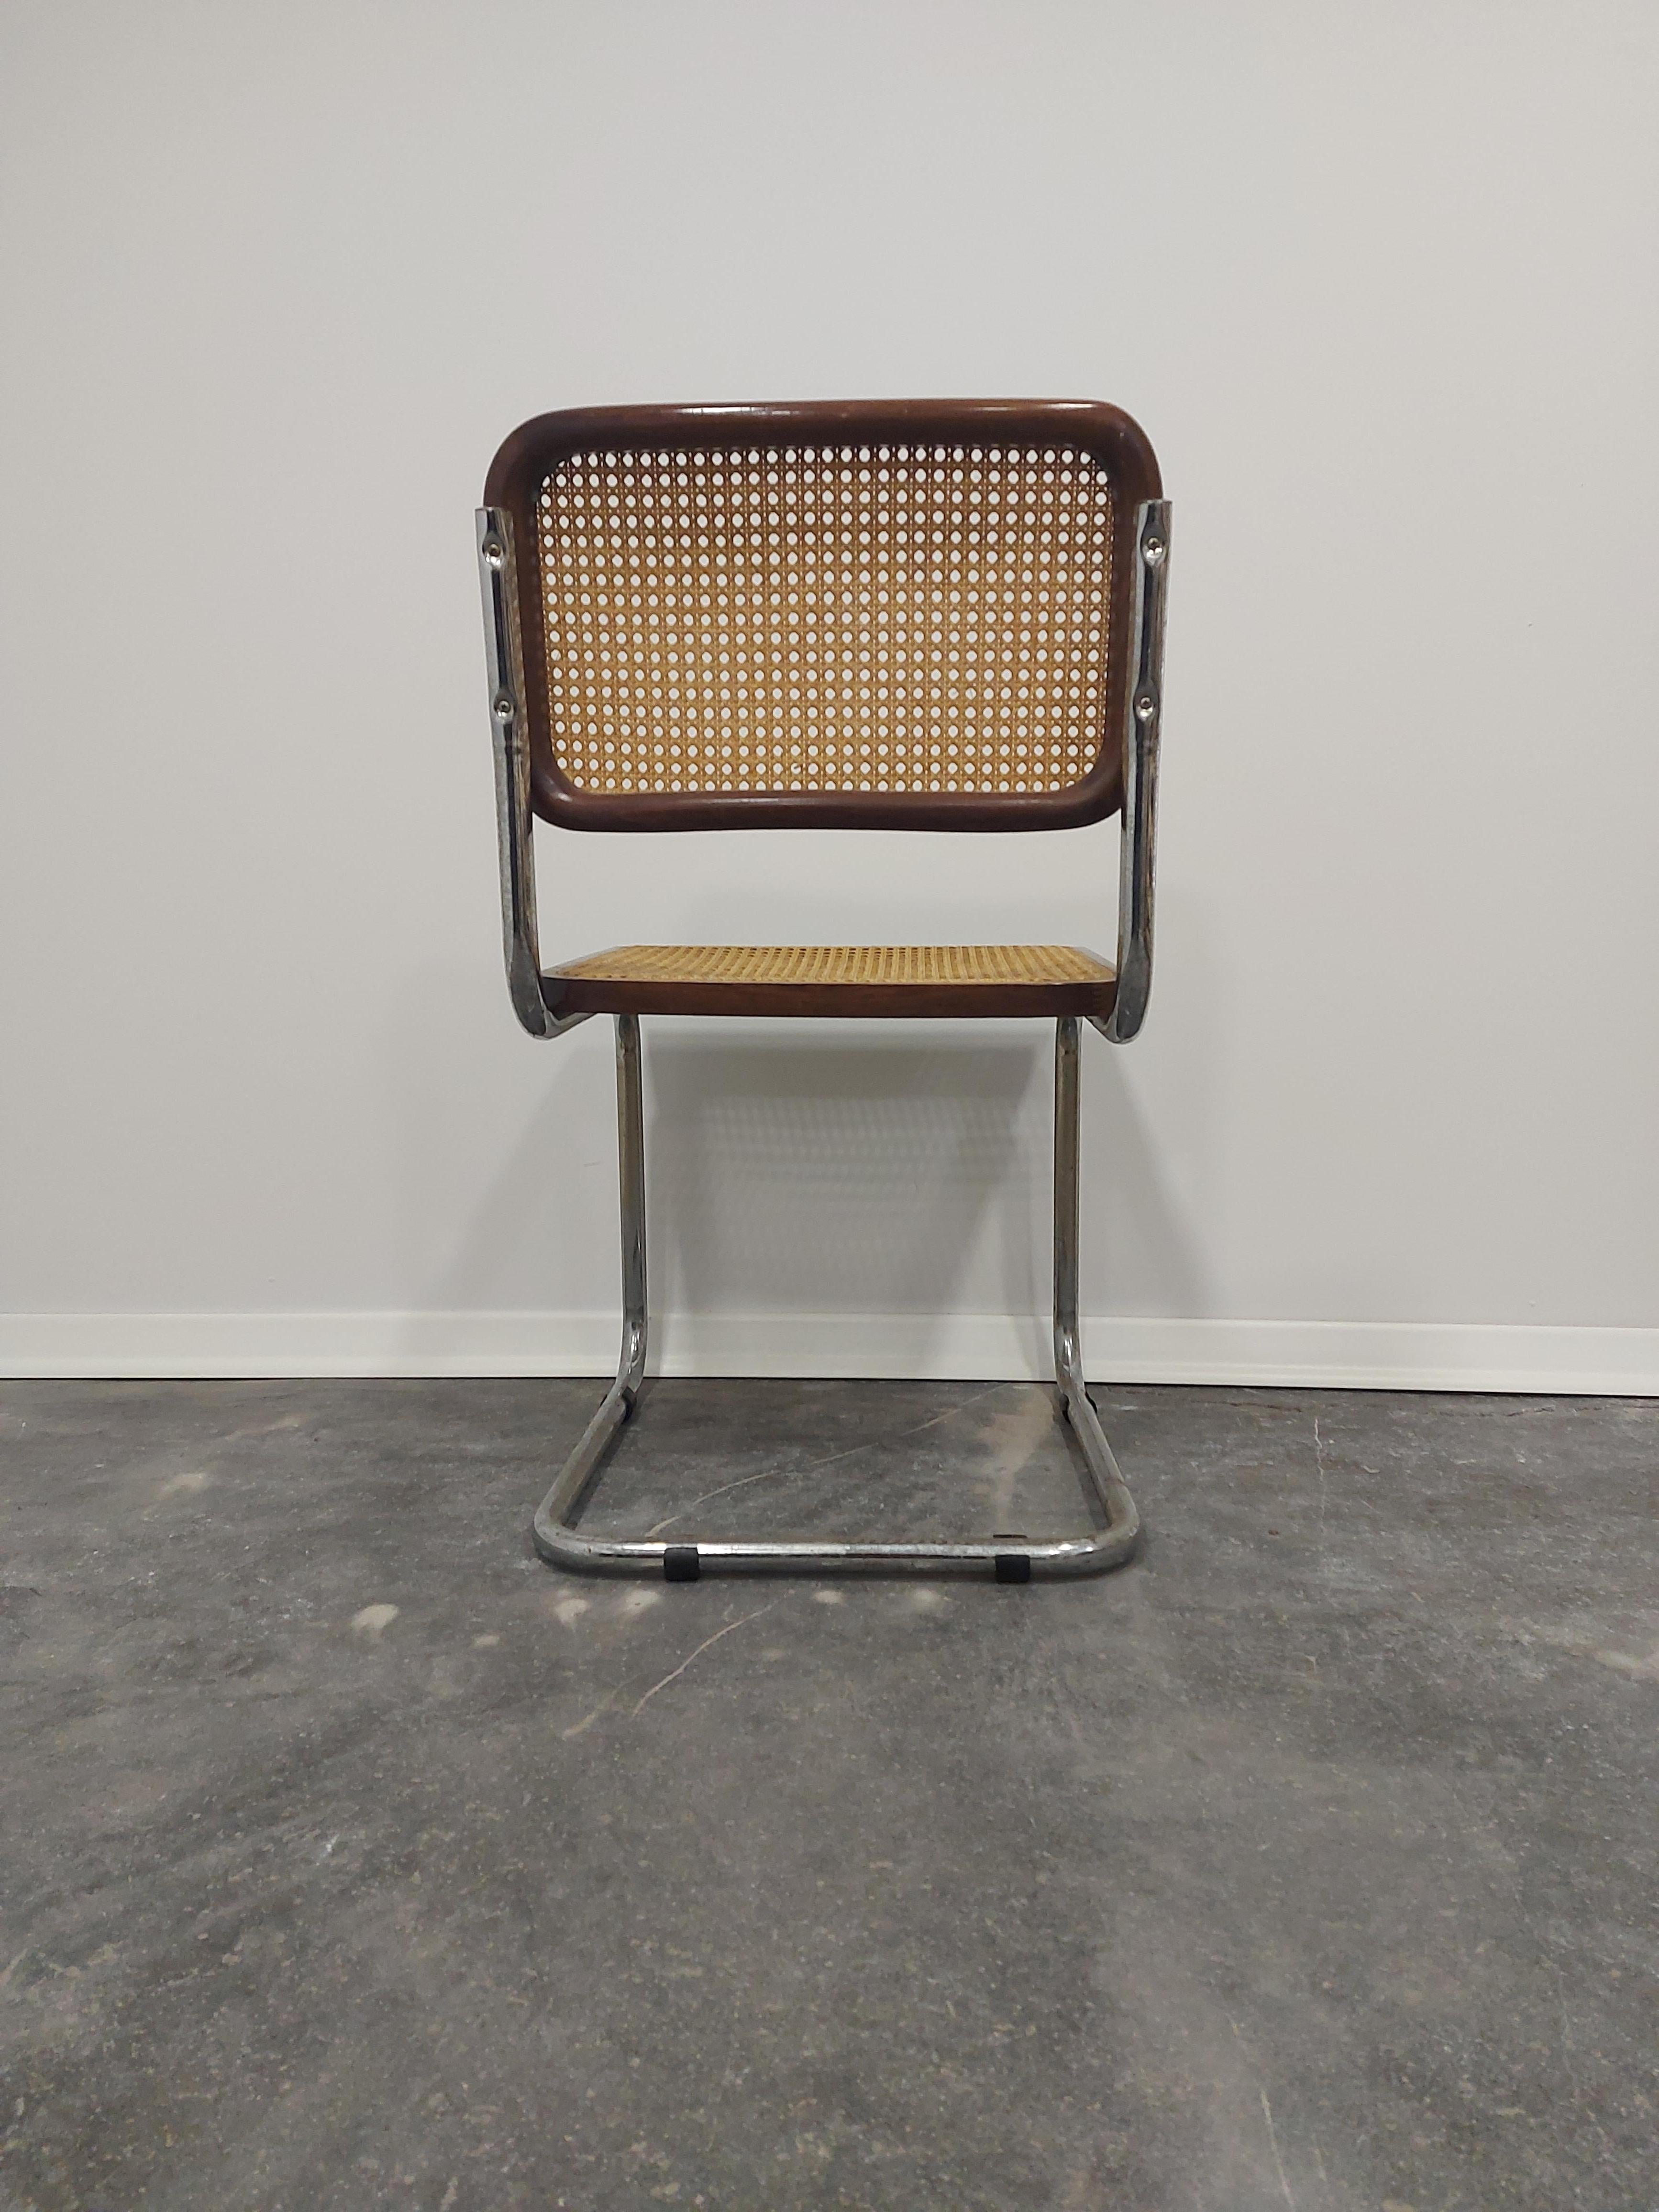 Cesca Chair by Marcel Breuer 1970s B32 1 of 5 For Sale 7